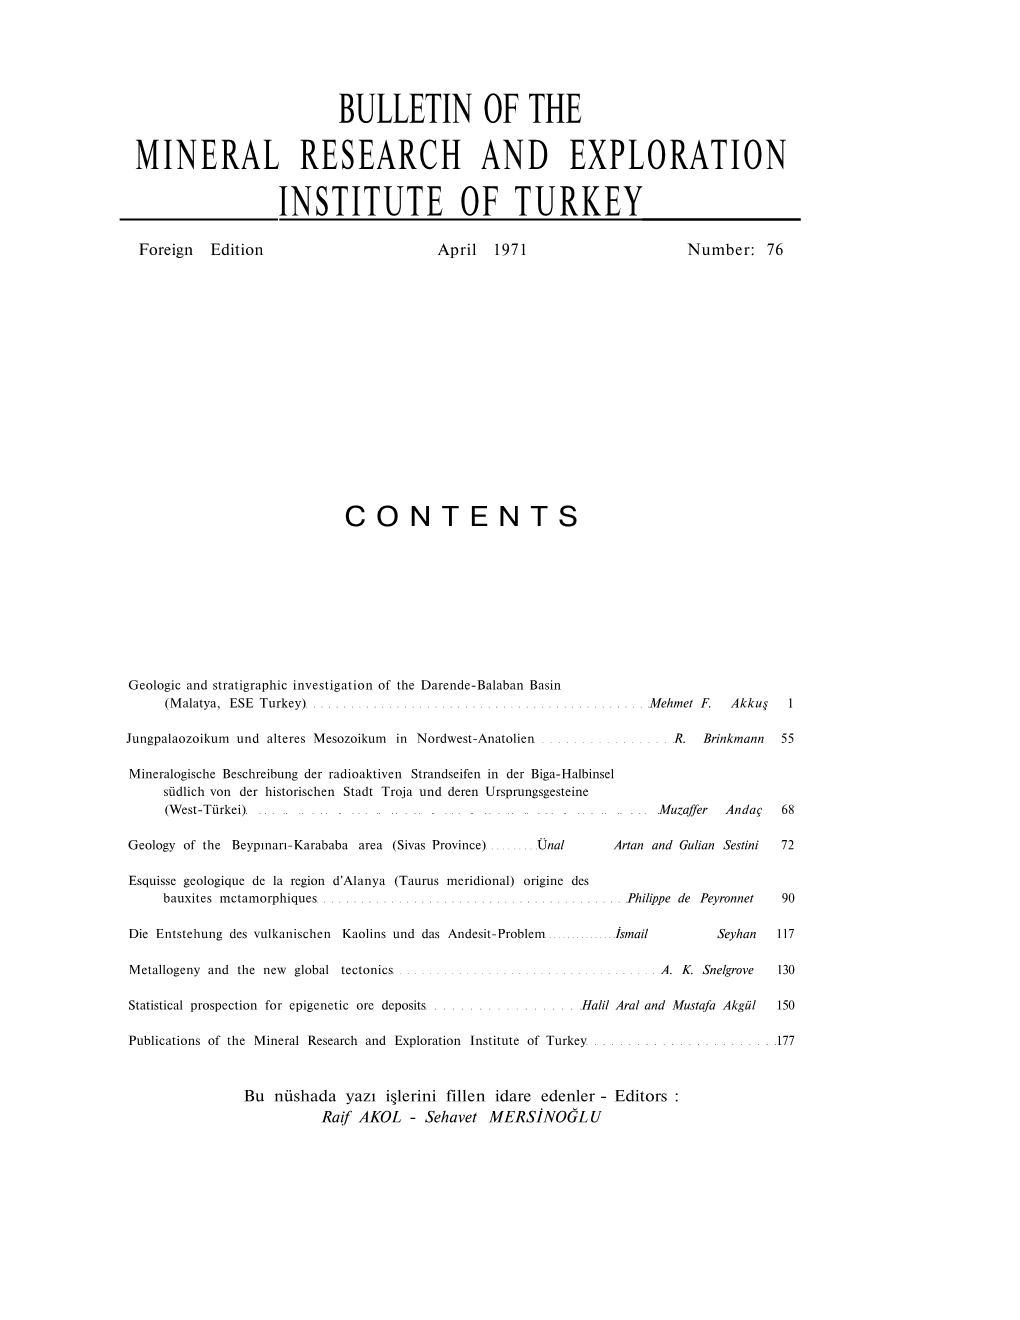 Bulletin of the Mineral Research and Exploration Institute of Turkey